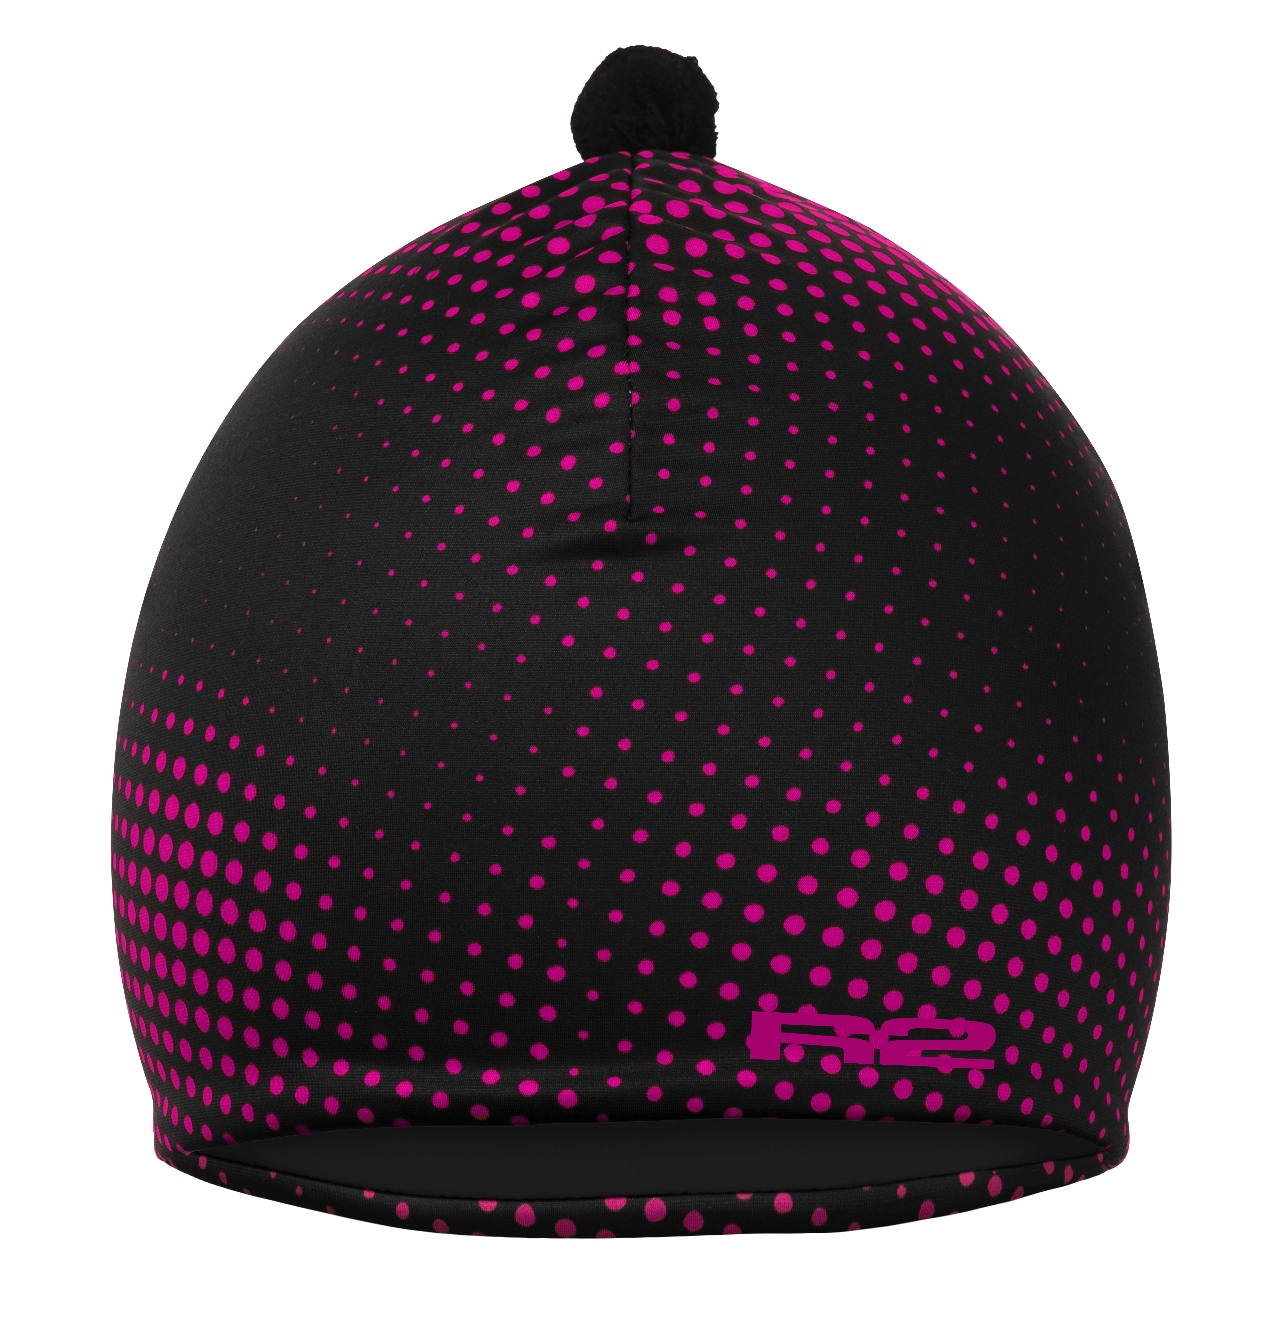 SPORTS FUNCTIONAL HAT R2 POINT  ATK11A